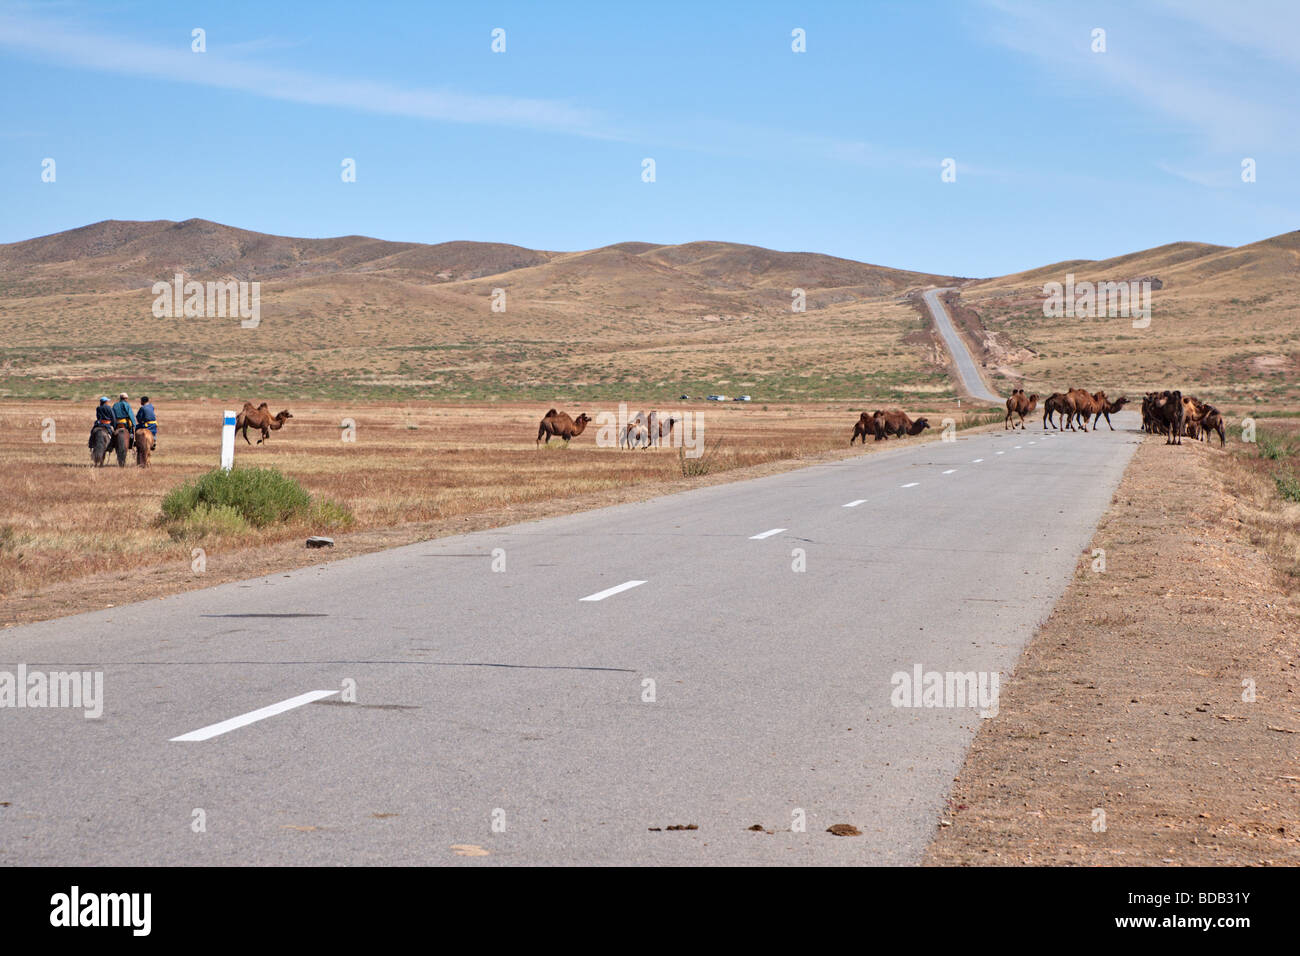 Herd of two humped camels blocks the highway, north central Mongolia Stock Photo